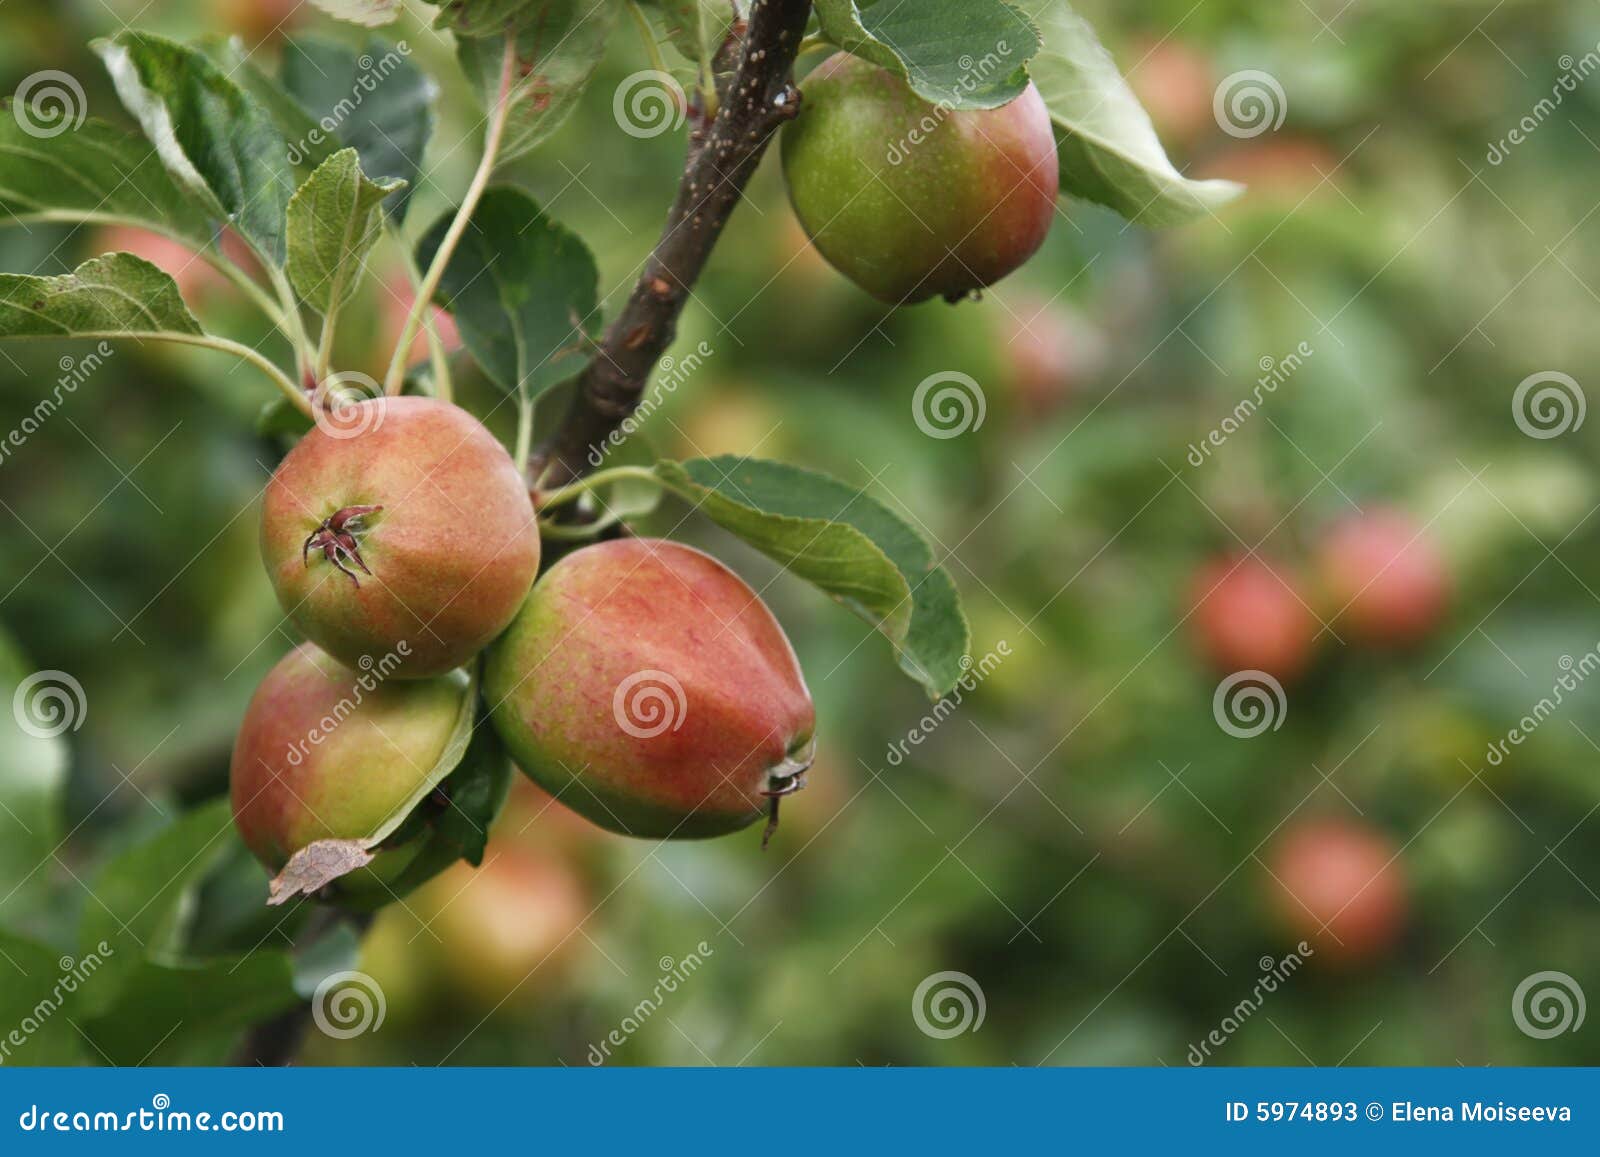 ripen apples on tree in nature